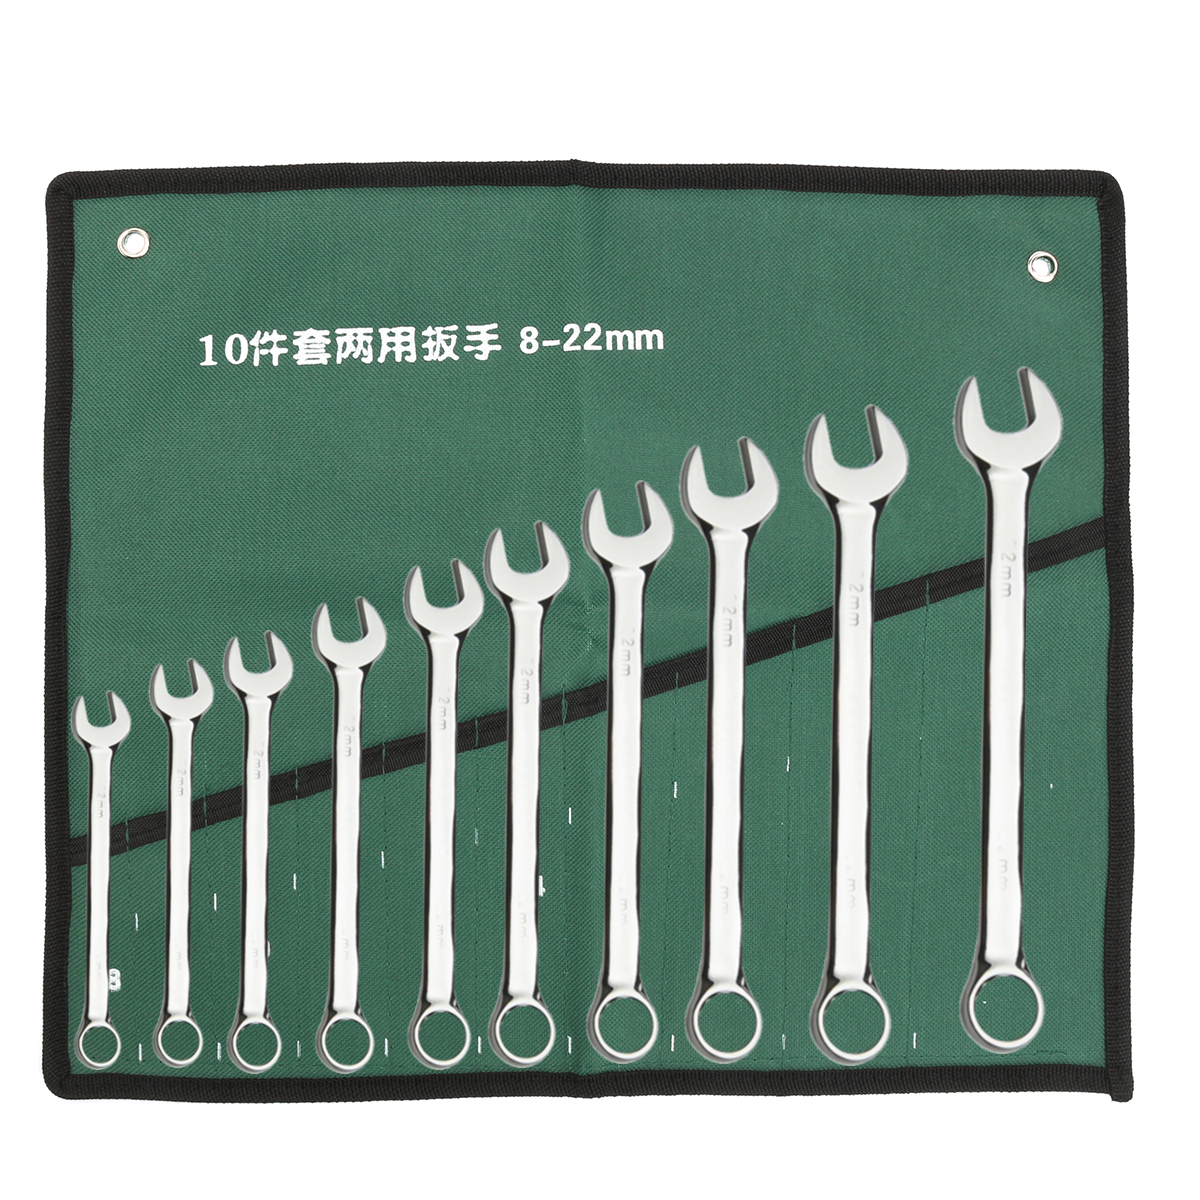 Canvas-Roll-Up-Tool-Storage-Bag-101420-Pocket-Spanner-Wrench-Organizer-Pouch-1288991-1